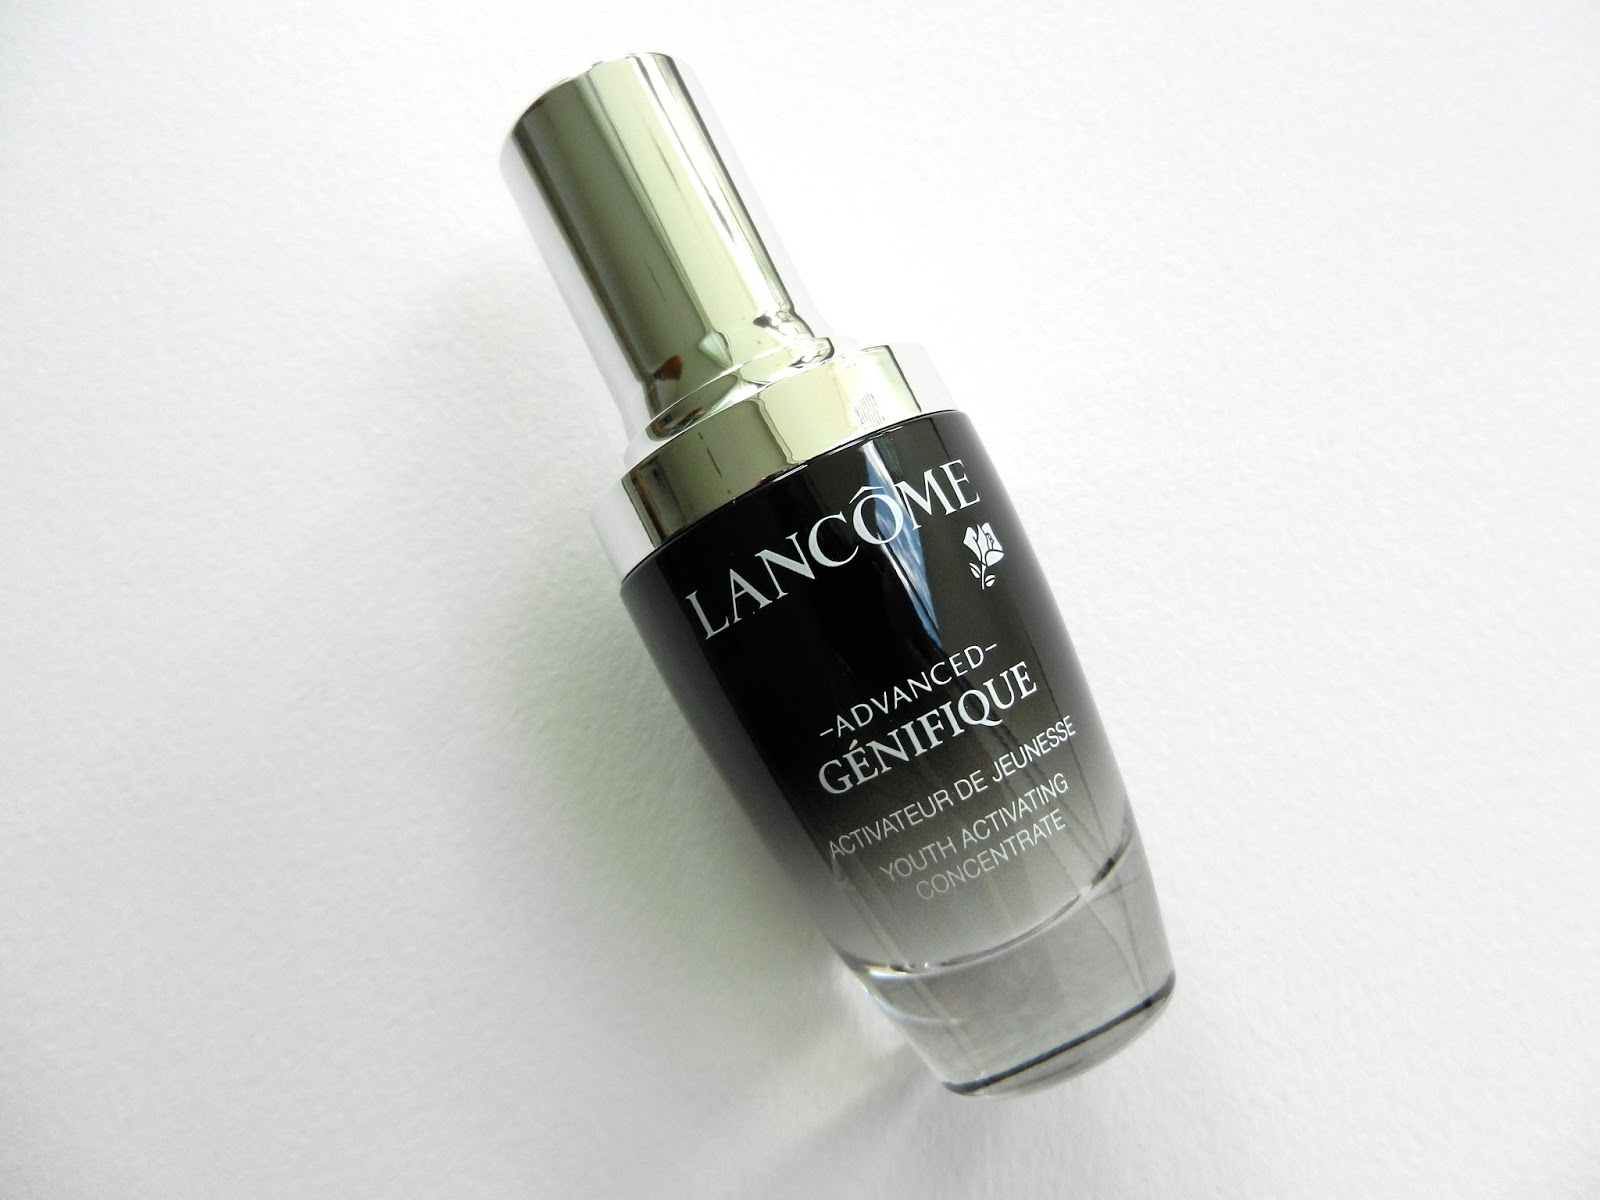 Lancome,Lancome NEW Advanced Genifique Youth Activating Concentrate,Lancome NEW Advanced Genifique Youth Activating Concentrate ราคา,Lancome NEW Advanced Genifique Youth Activating Concentrate รีวิว,Lancome NEW Advanced Genifique Youth Activating Concentrate pantip,Lancome NEW Advanced Genifique Youth Activating Concentrate jeban